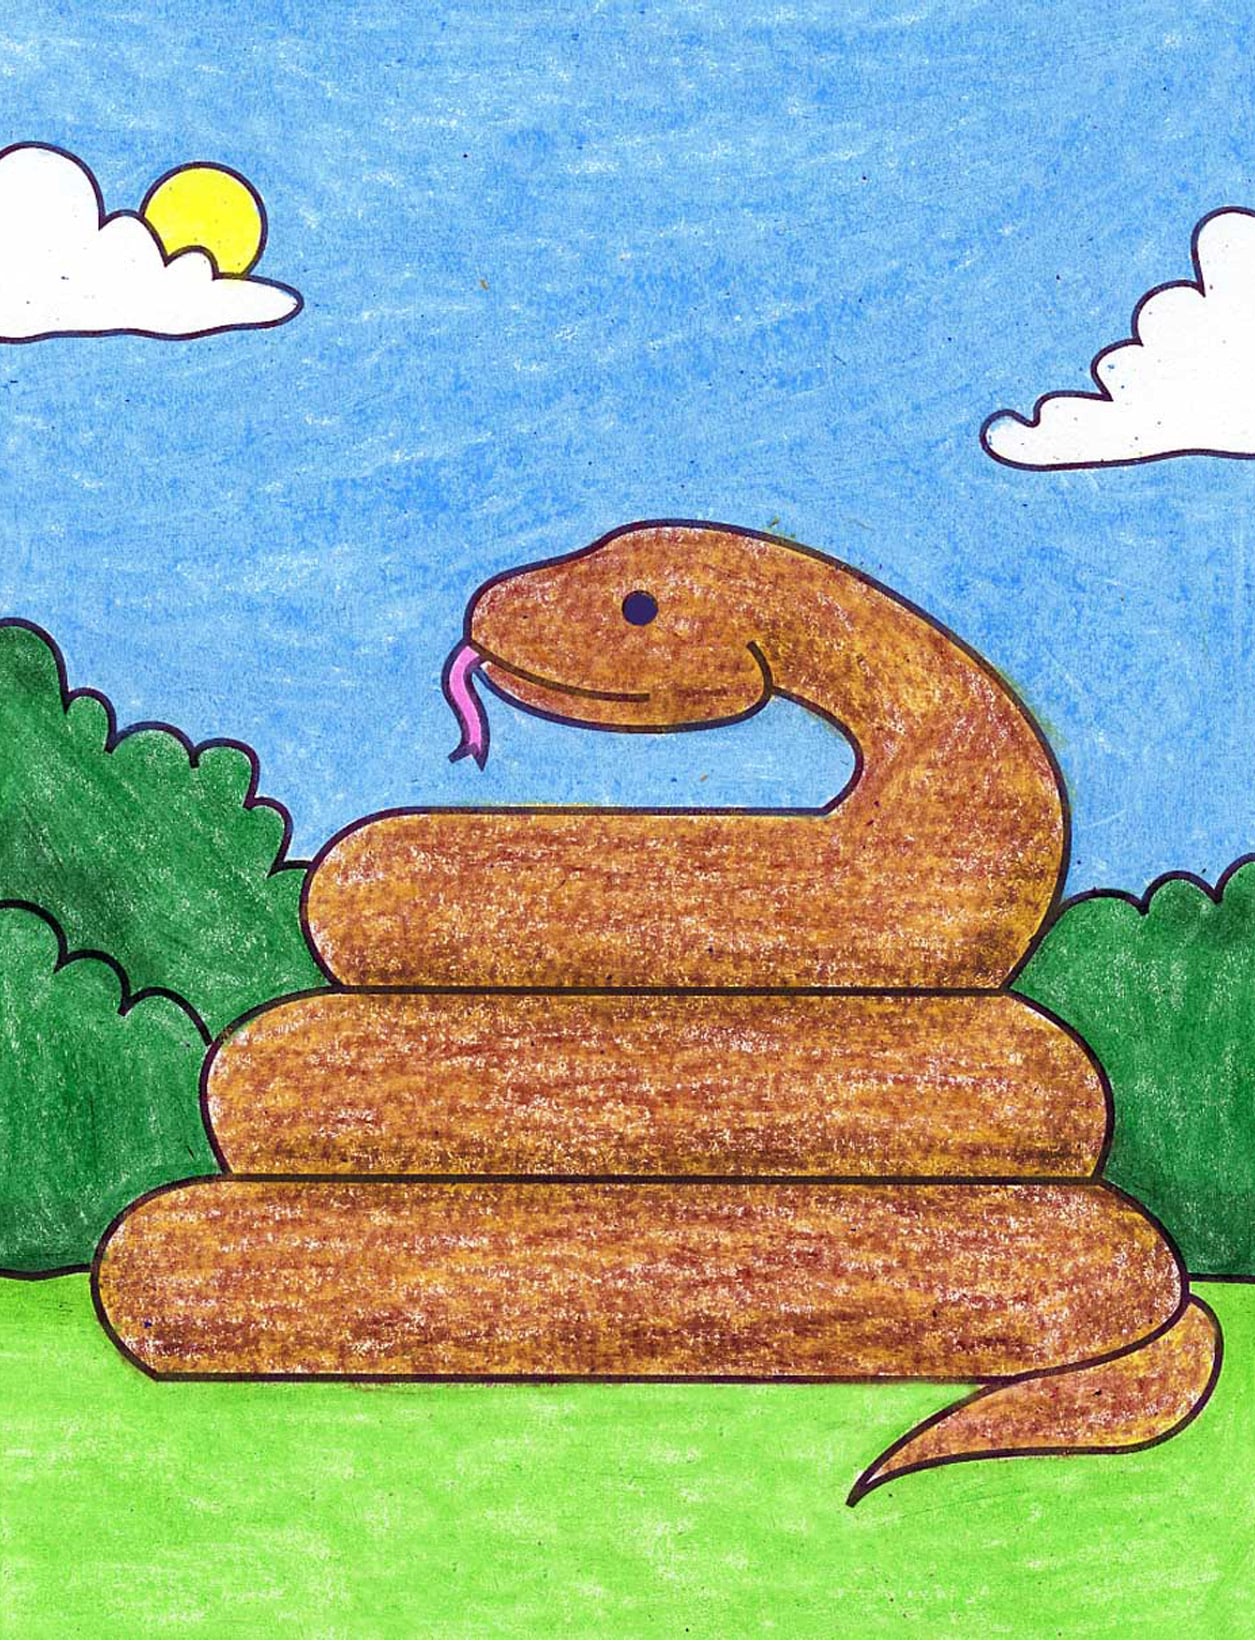 How to Draw a Cartoon Snake Easy Step-by-Step Drawing Tutorial for Kids |  How to Draw Step by Step Drawing Tutorials